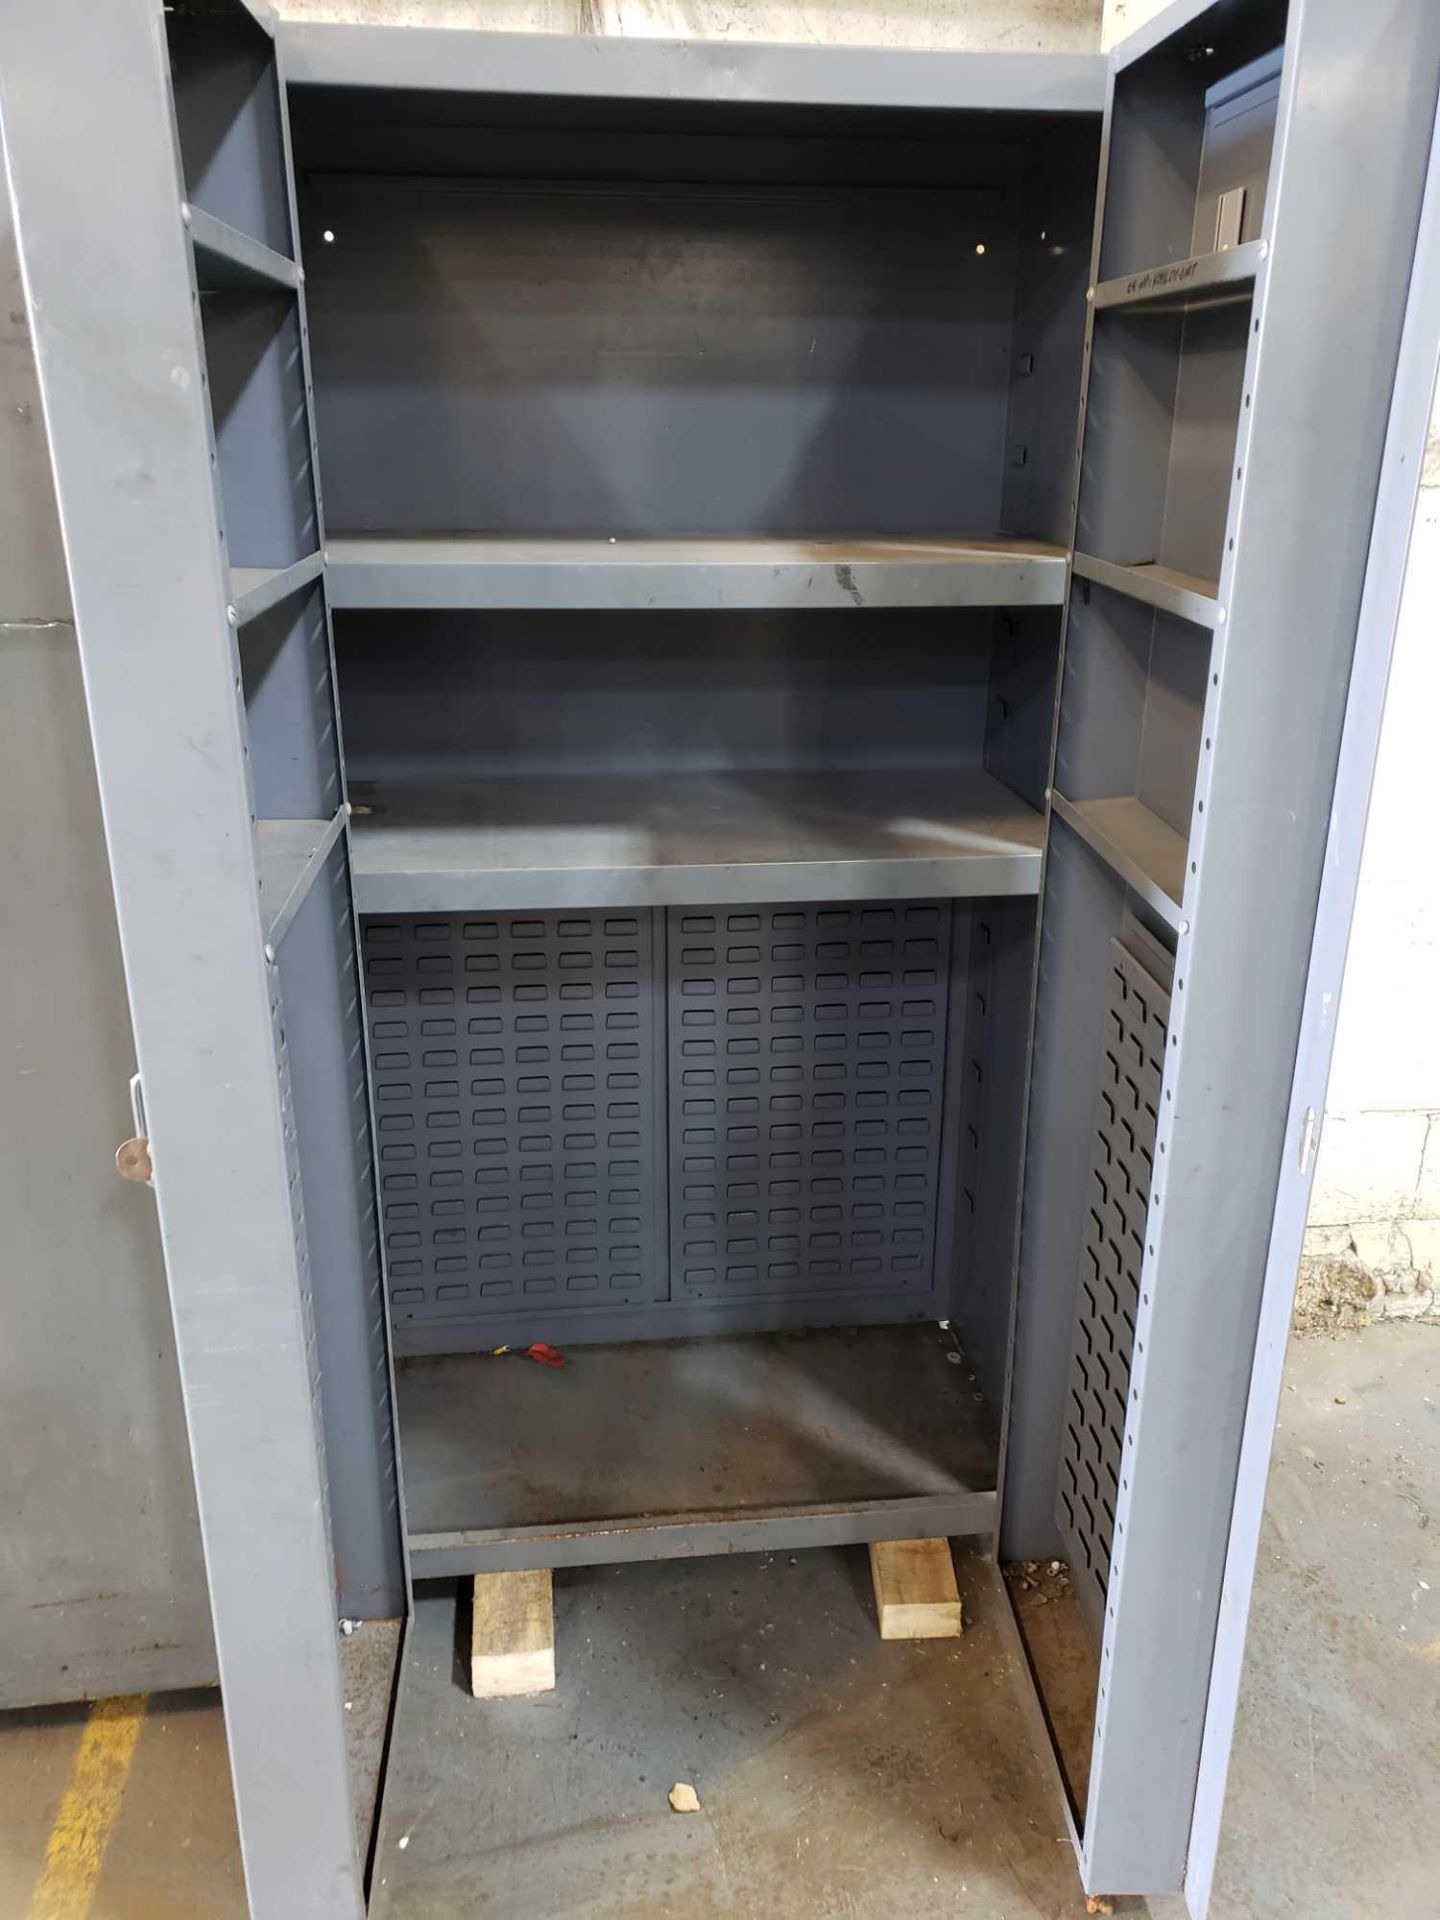 Heavy duty industrial cabinet for Akro bins. 72" tall x 38" wide x 24" deep. Appears to be equipto o - Image 2 of 2